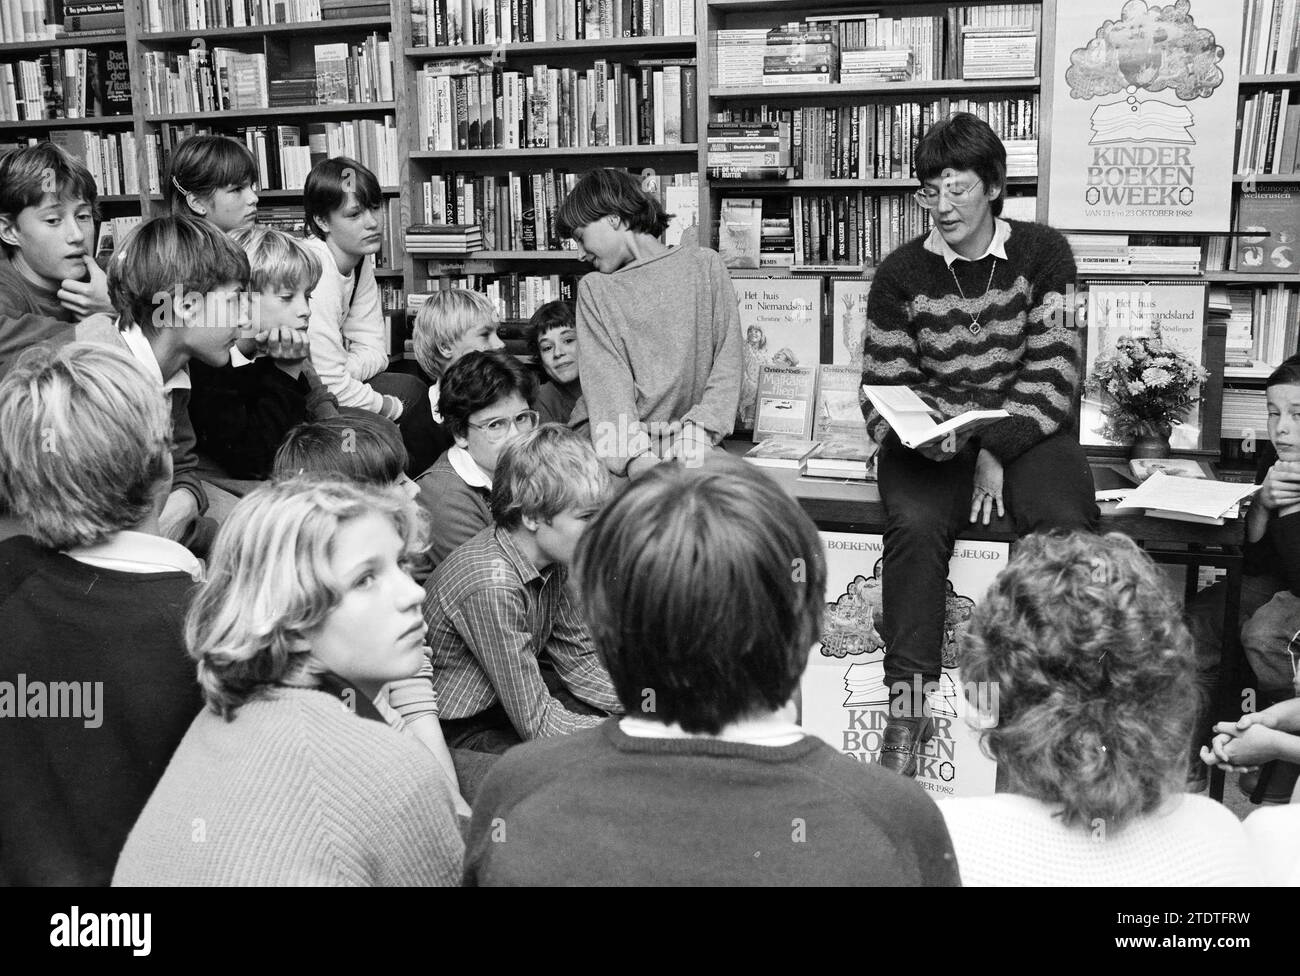 Children's Book Week, storytelling at Willa Reinke, Books and booksellers, 13-10-1982, Whizgle News from the Past, Tailored for the Future. Explore historical narratives, Dutch The Netherlands agency image with a modern perspective, bridging the gap between yesterday's events and tomorrow's insights. A timeless journey shaping the stories that shape our future Stock Photo